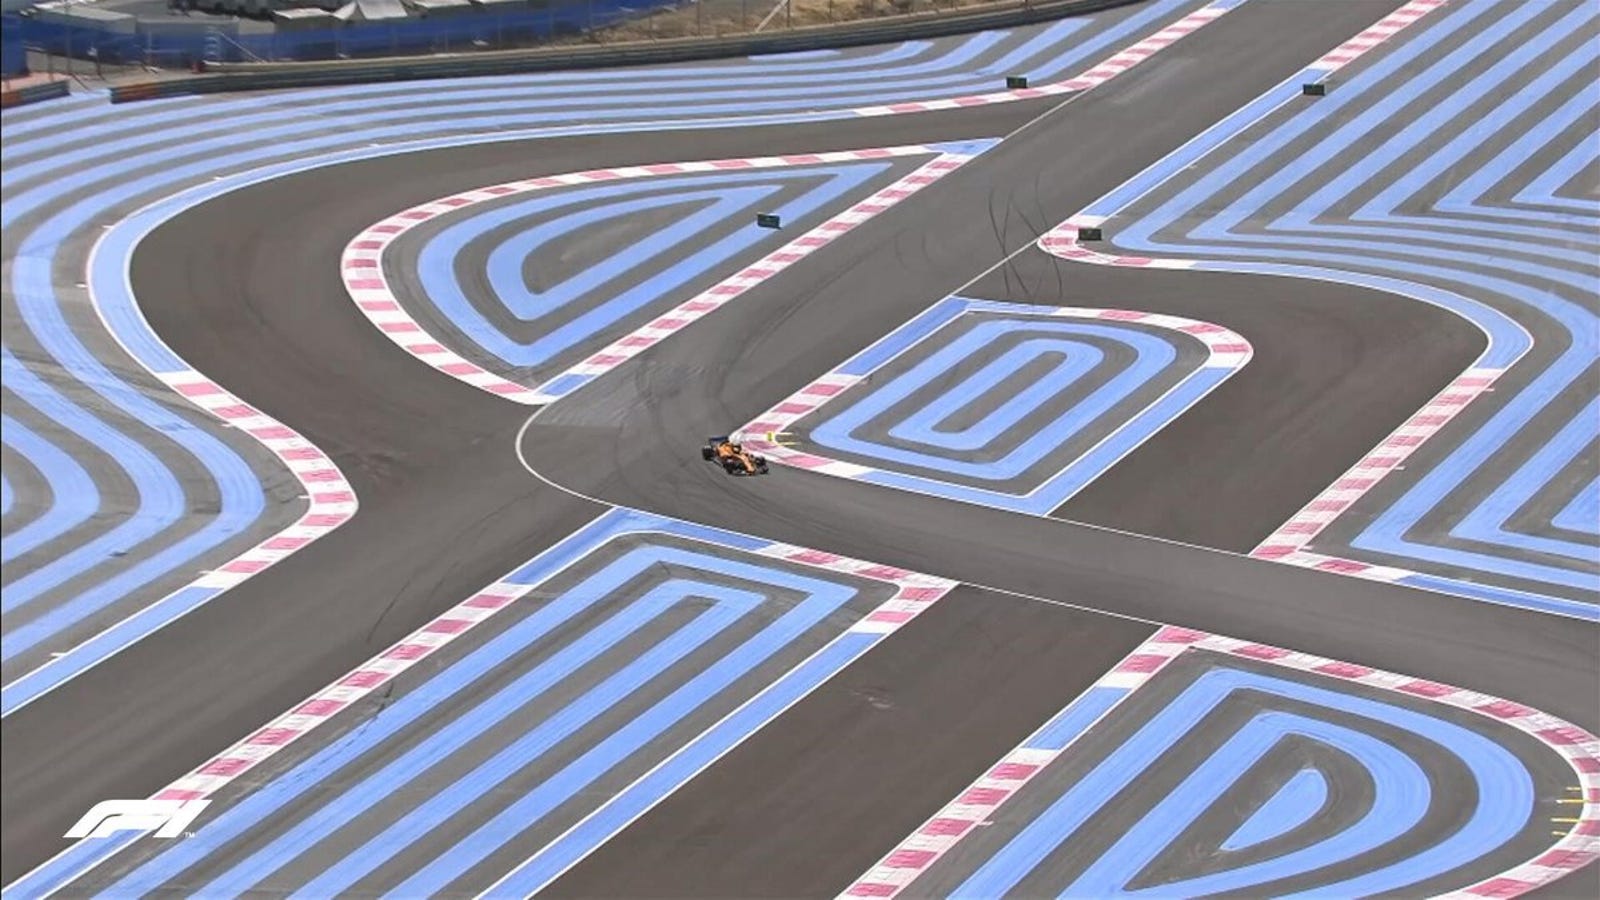 A Definitive Guide To All The Other Circuits The Formula One French